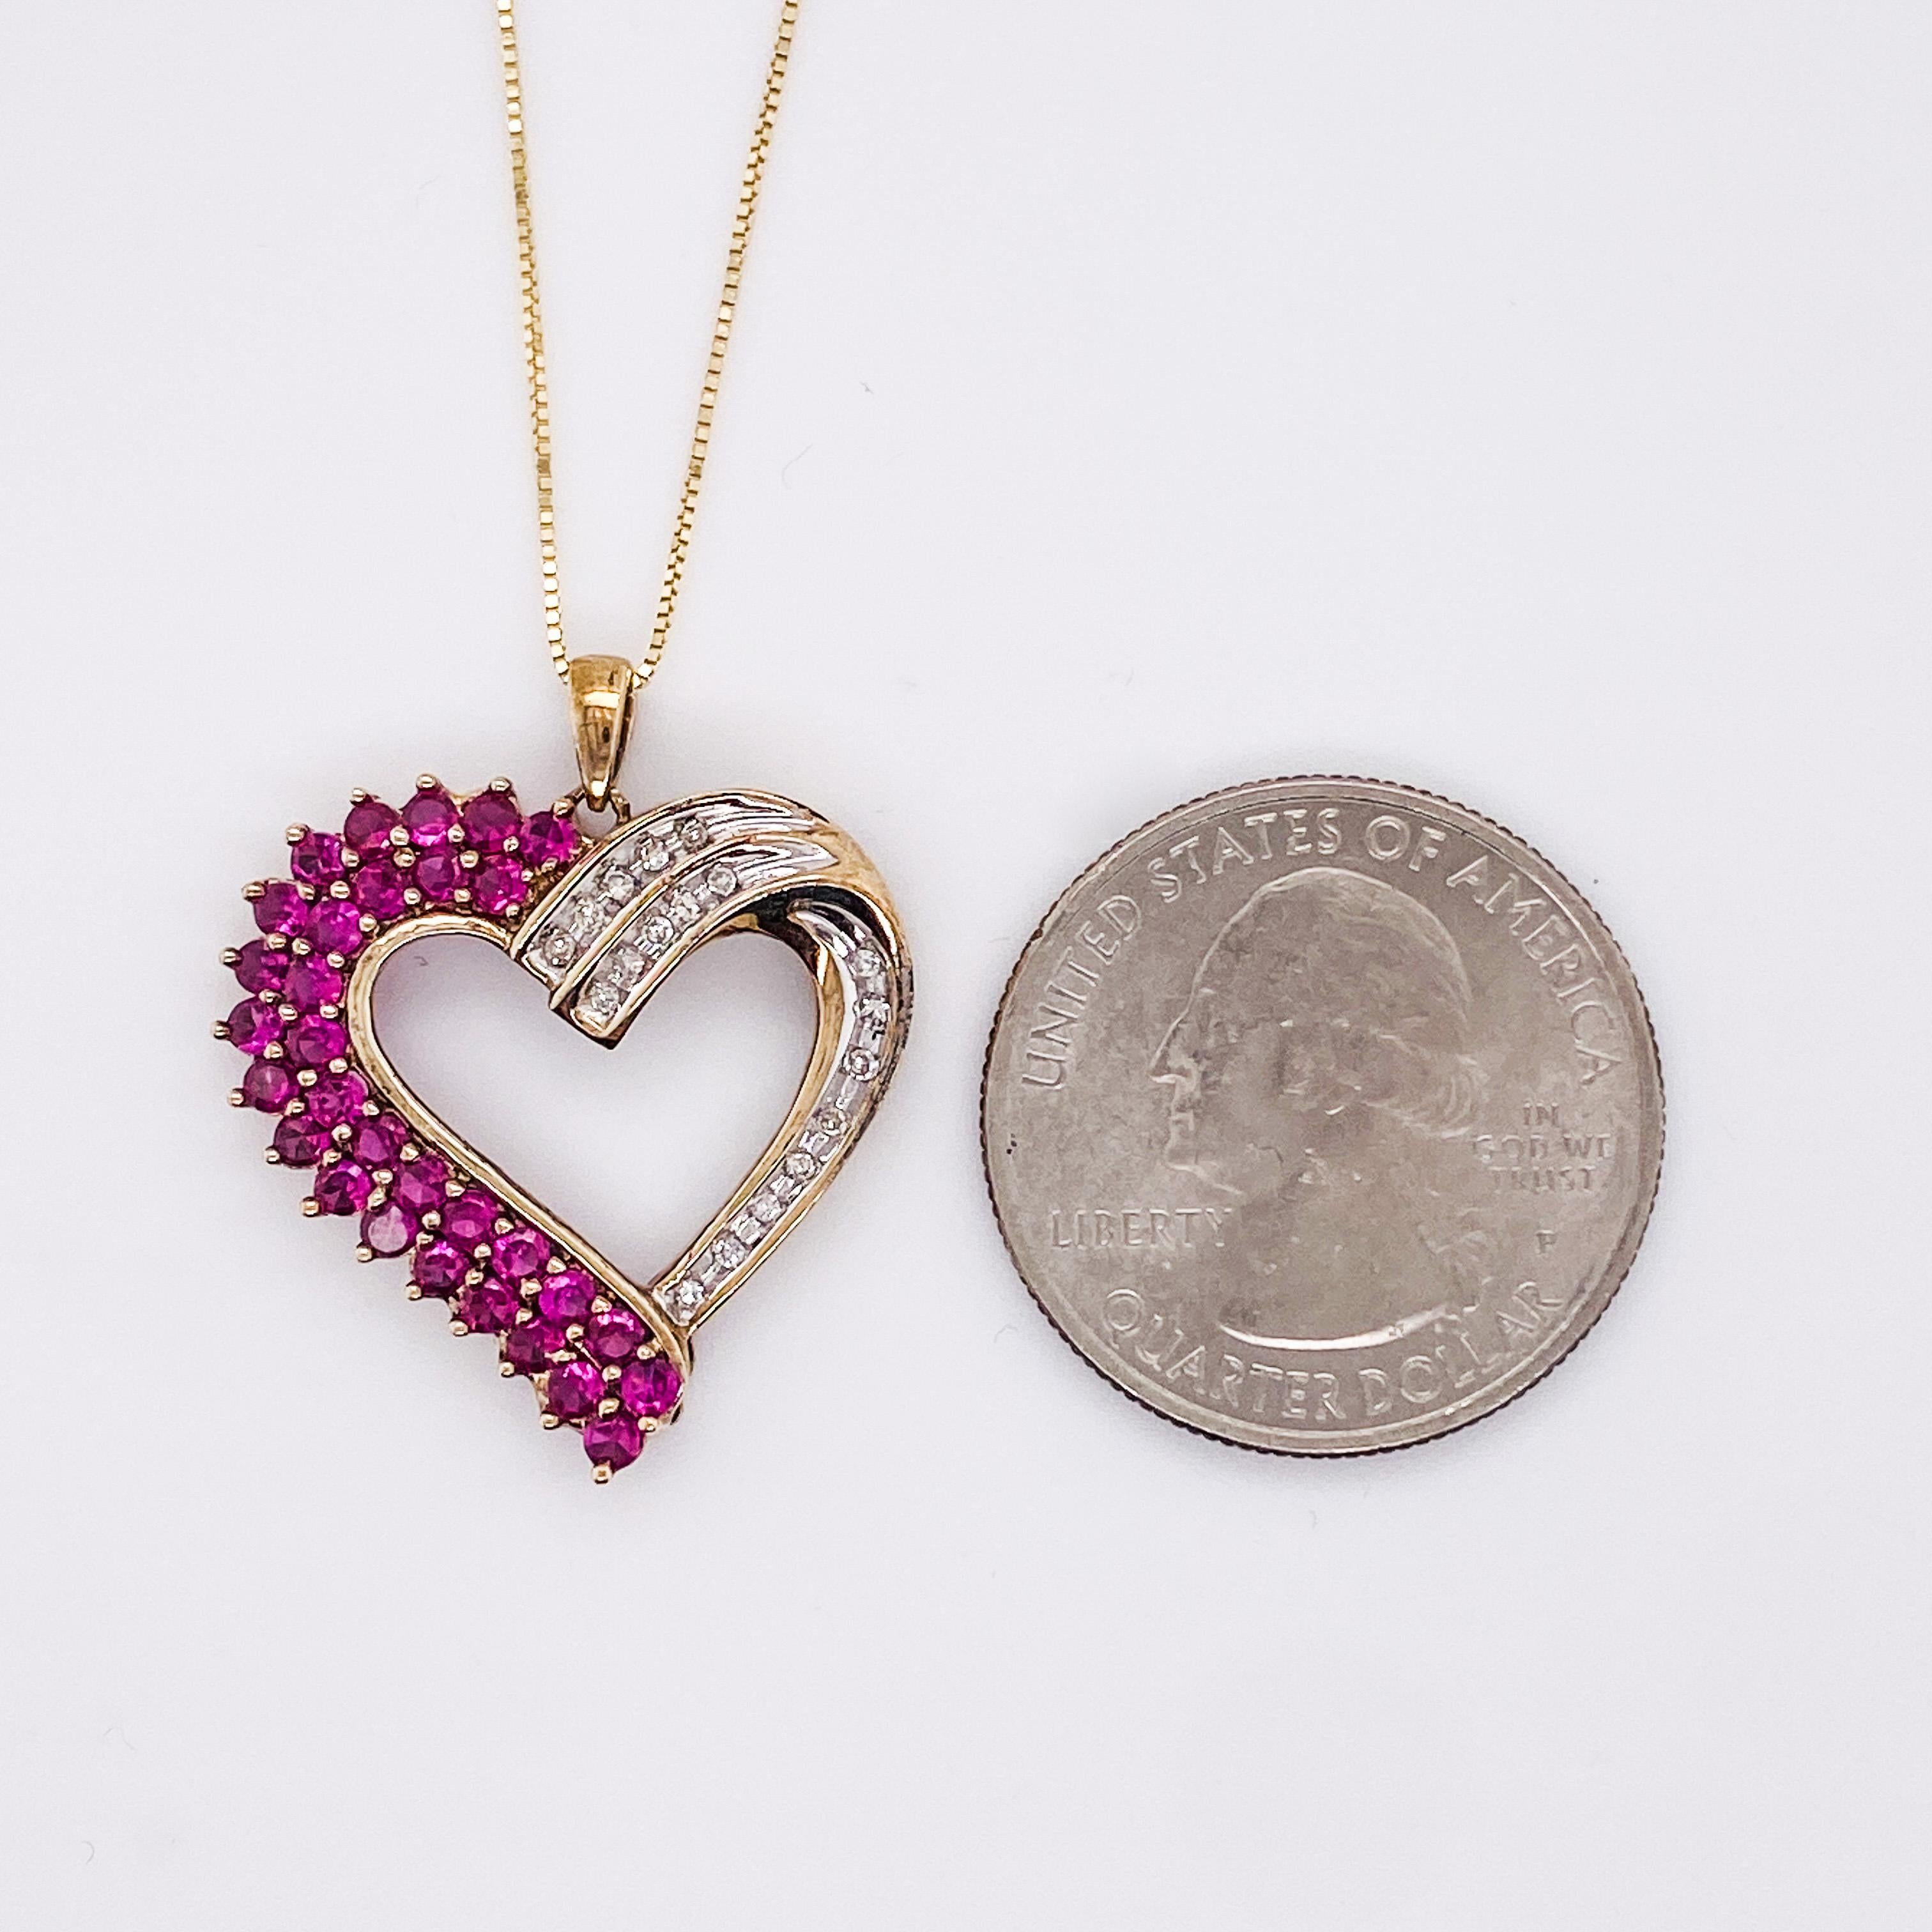 Vintage 1.67 Carats Ruby & Diamond Heart Pendant Charm in 14 Karat Gold In Excellent Condition For Sale In Austin, TX